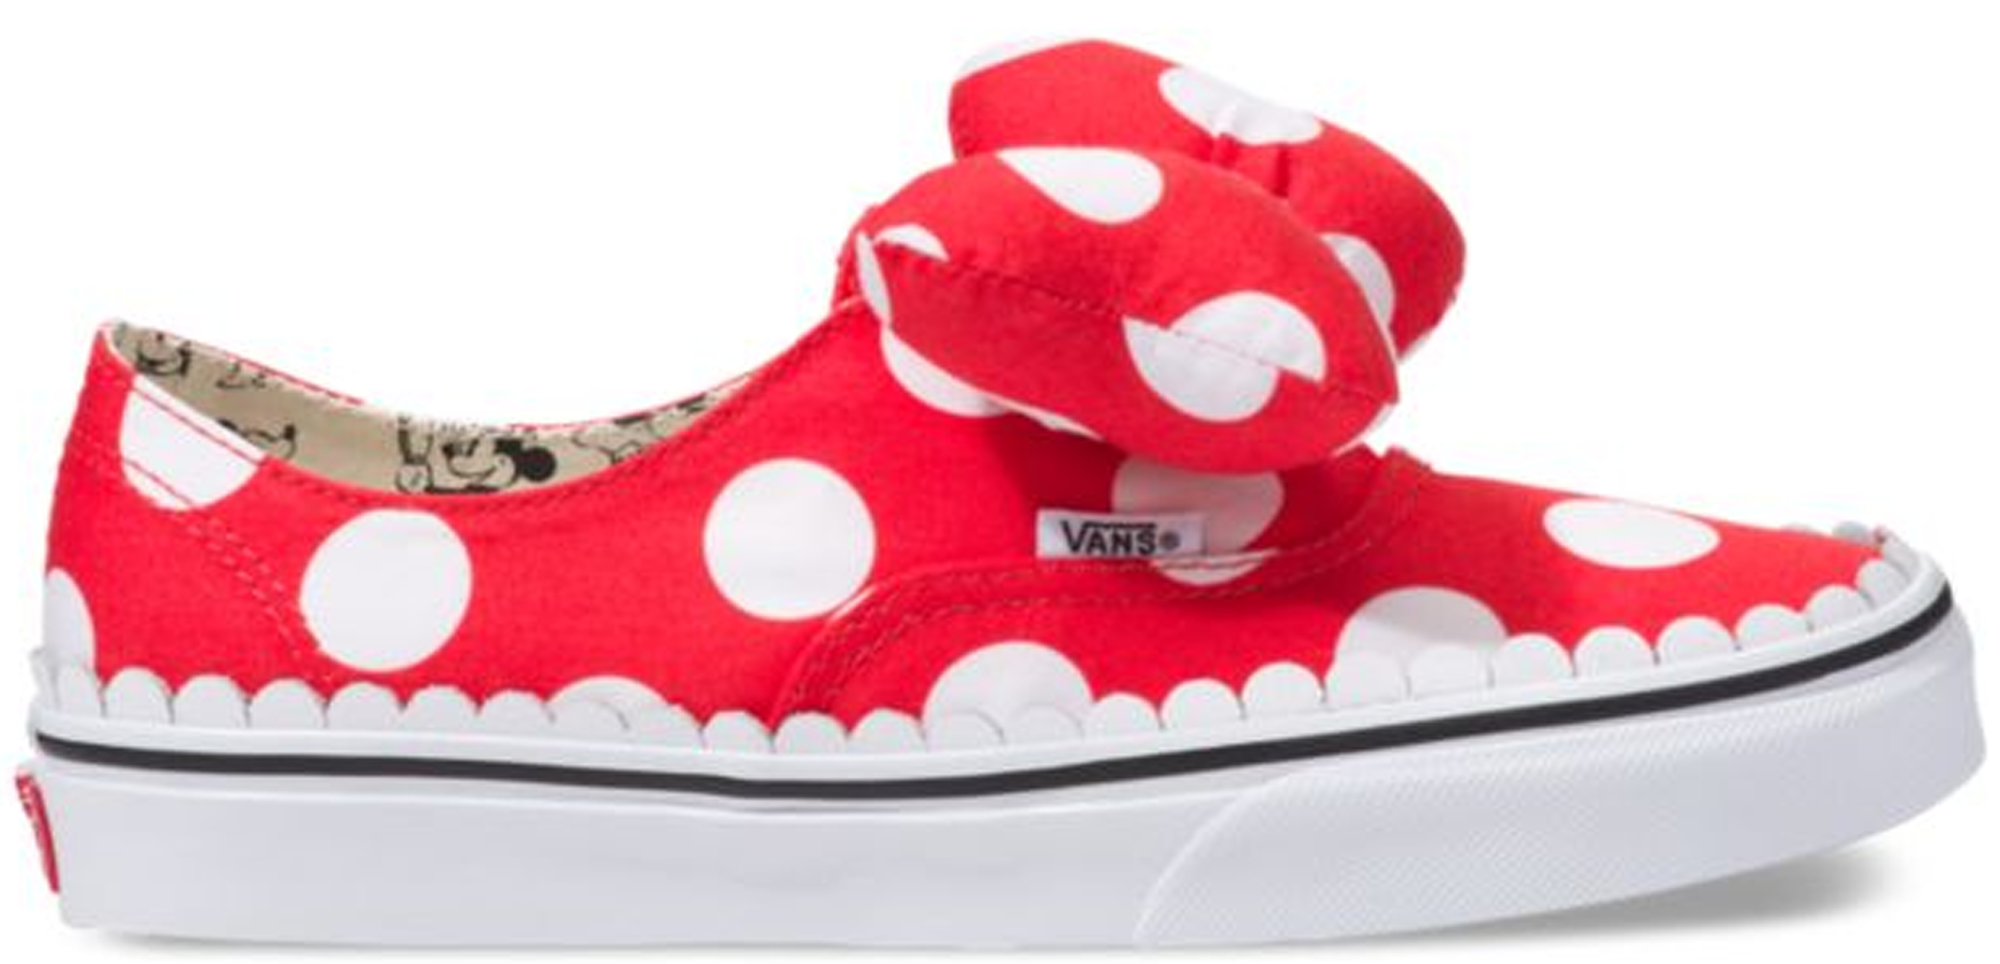 minnie mouse vans with bow